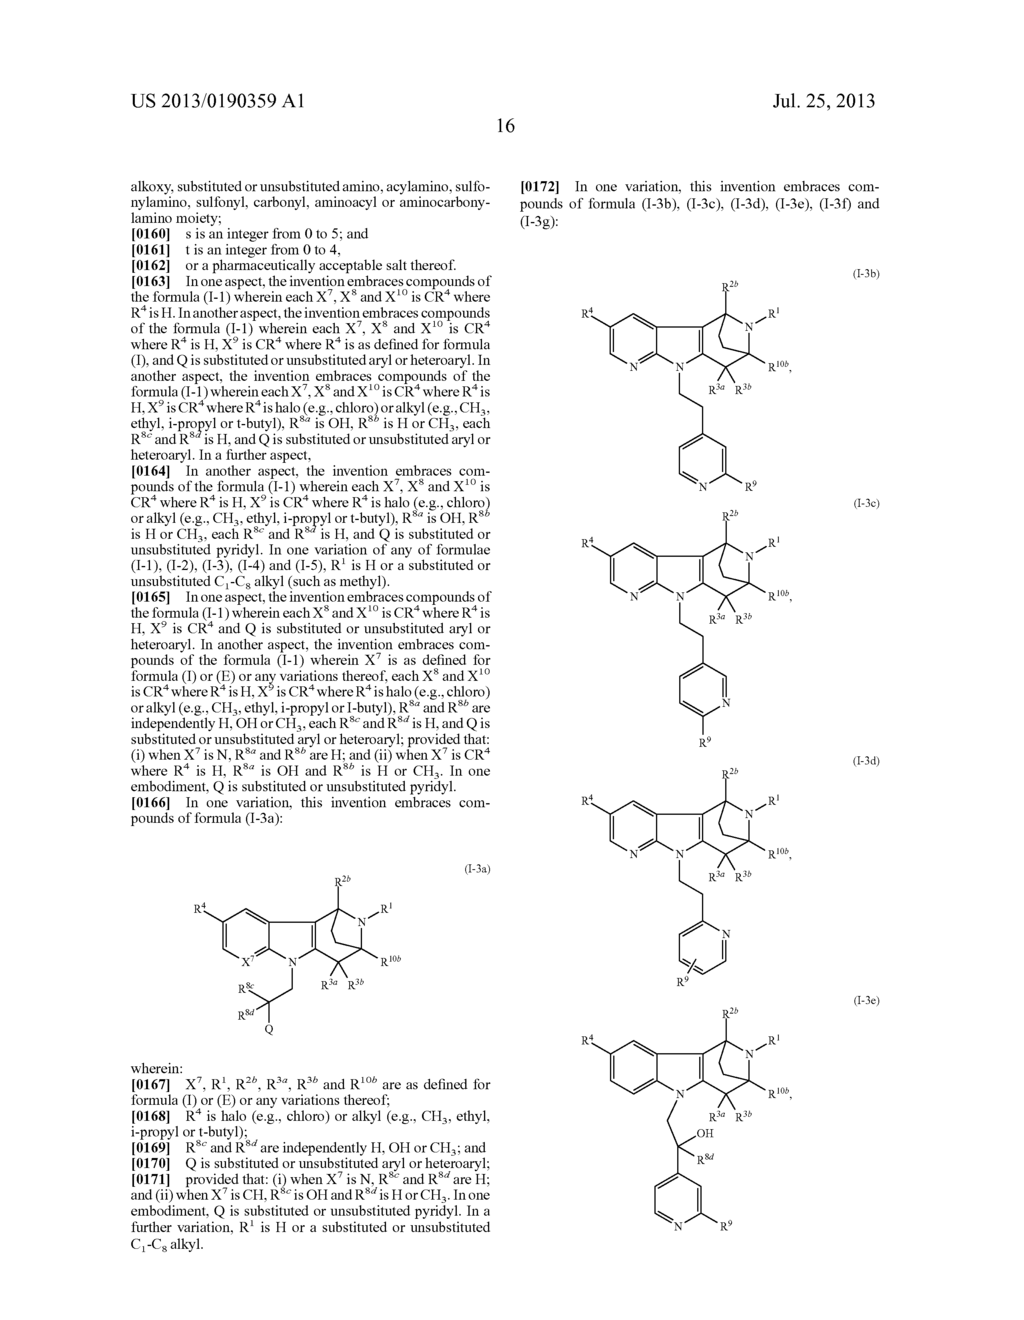 BRIDGED HETEROCYCLIC COMPOUNDS AND METHODS OF USE - diagram, schematic, and image 17